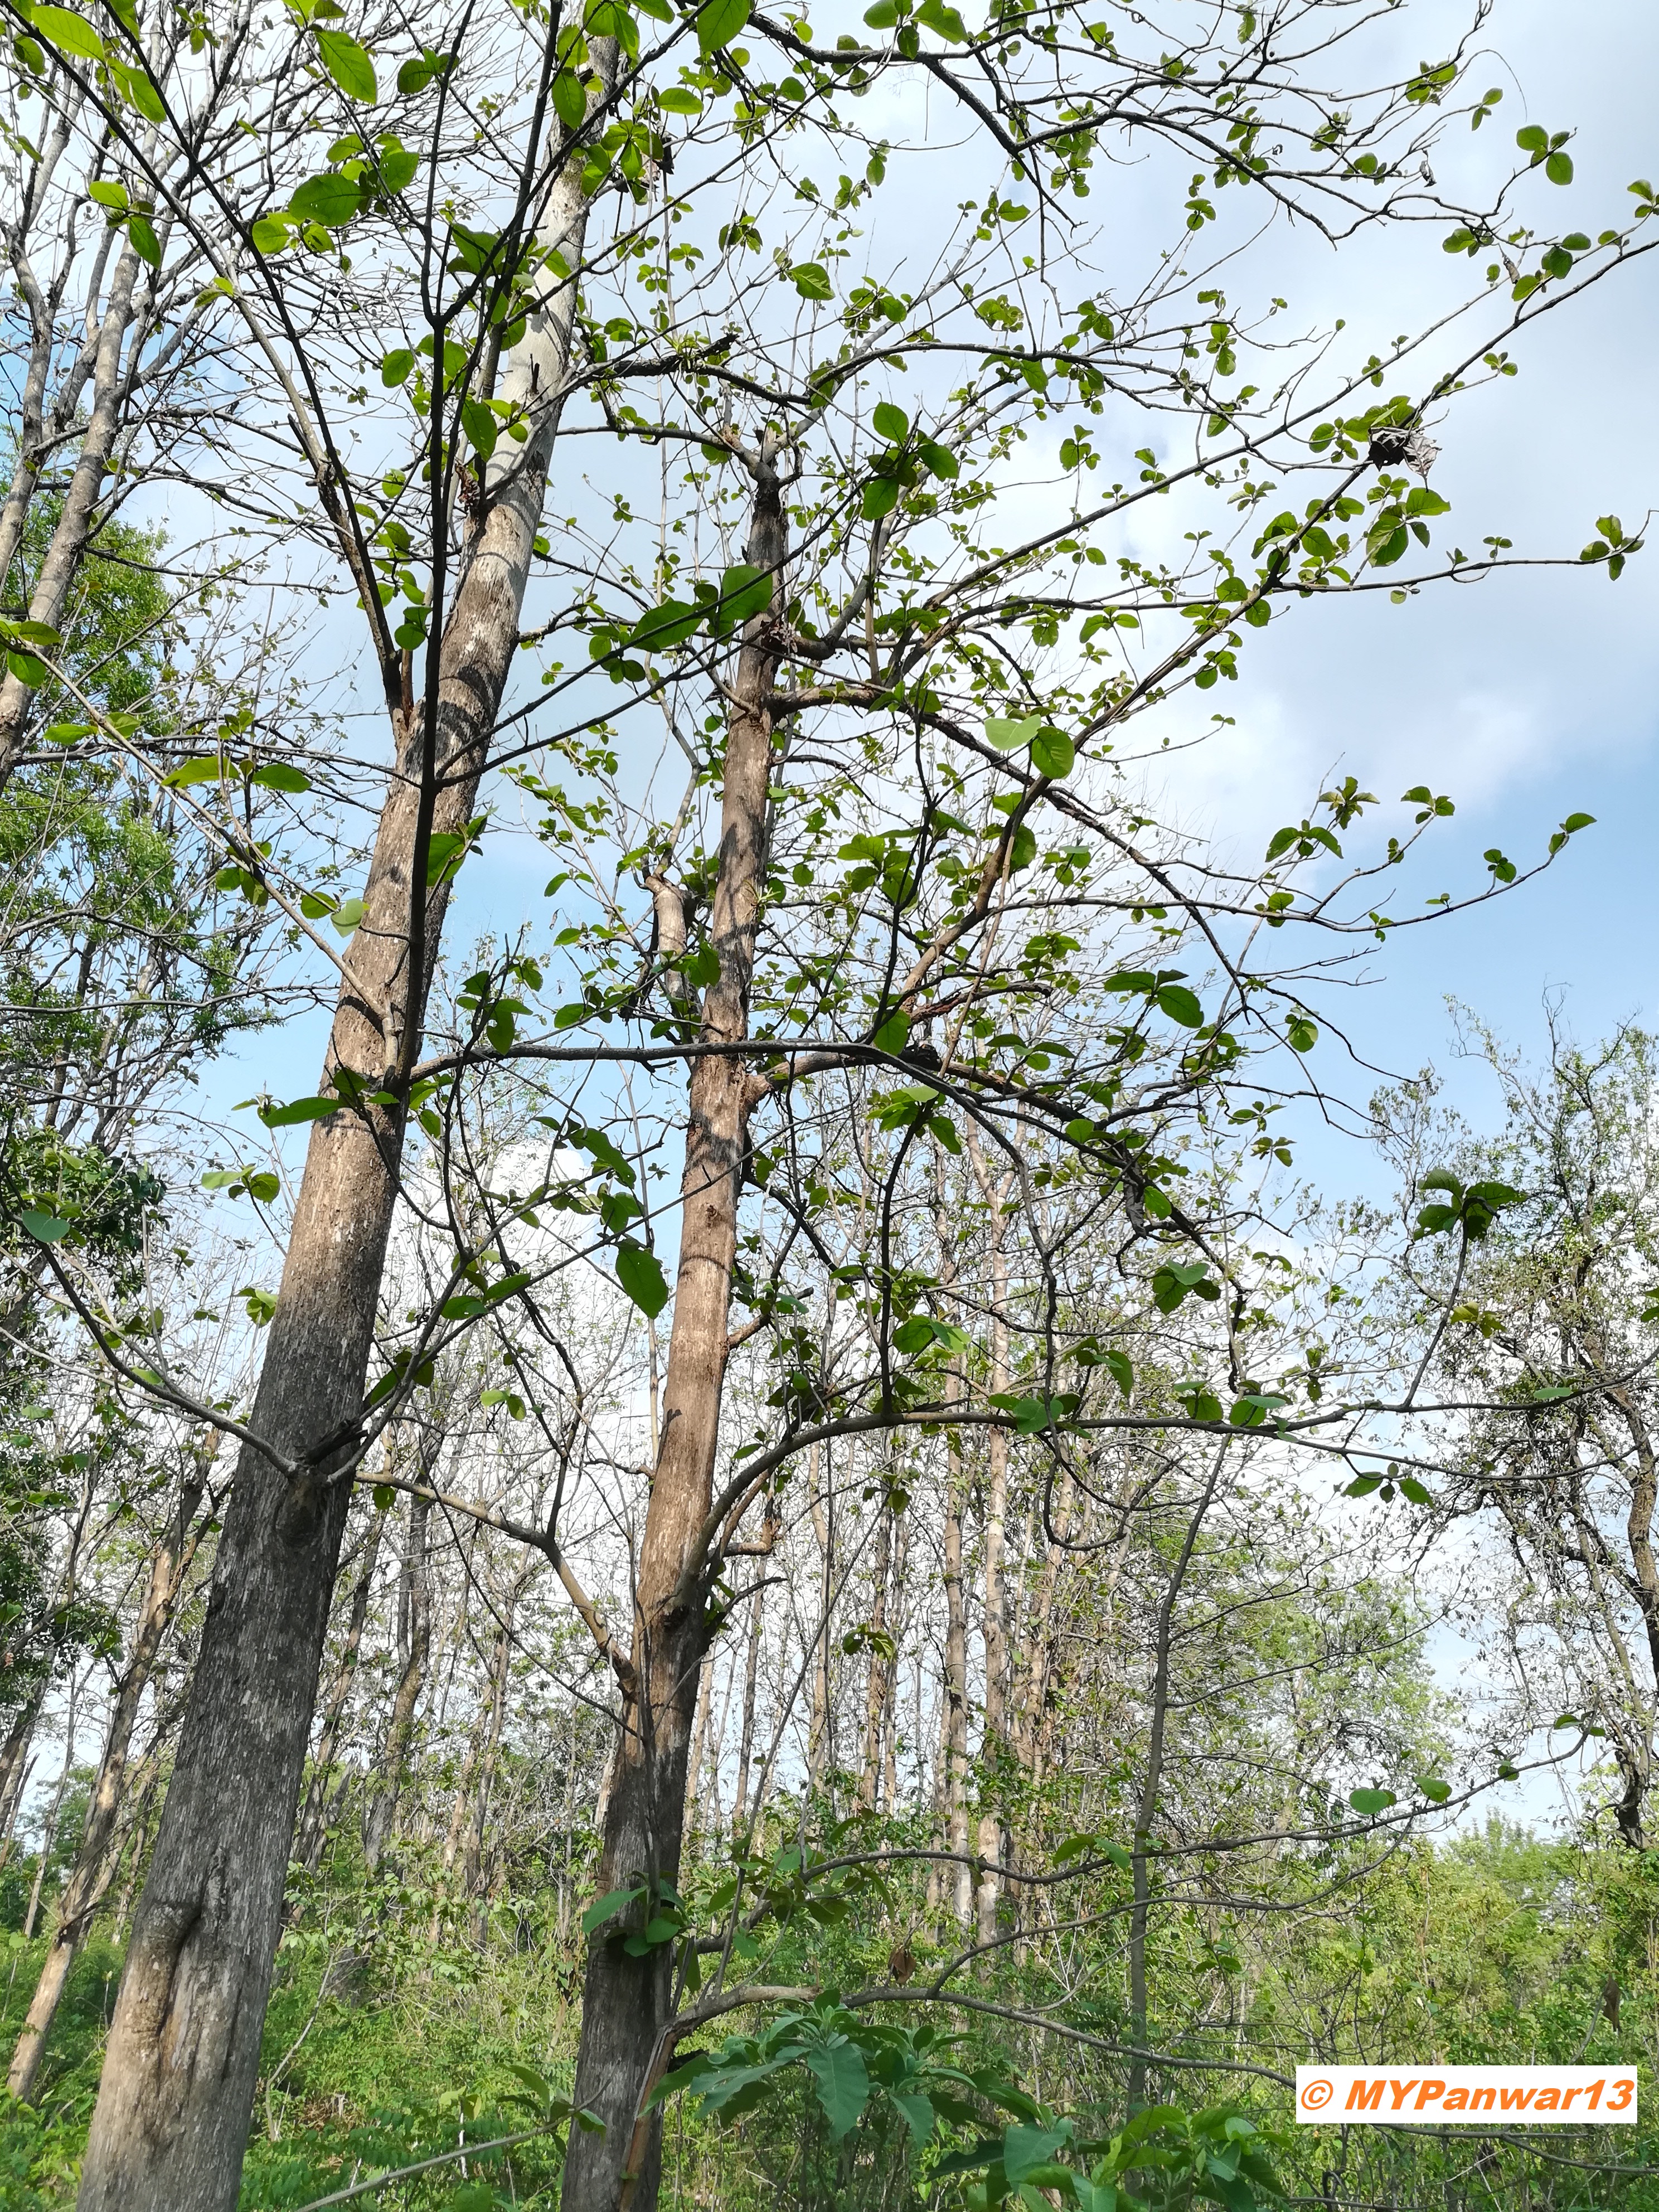 Leaves budding on the trees in the forest in spring season (pic taken by @MYPanwar13 in Dehradun, India